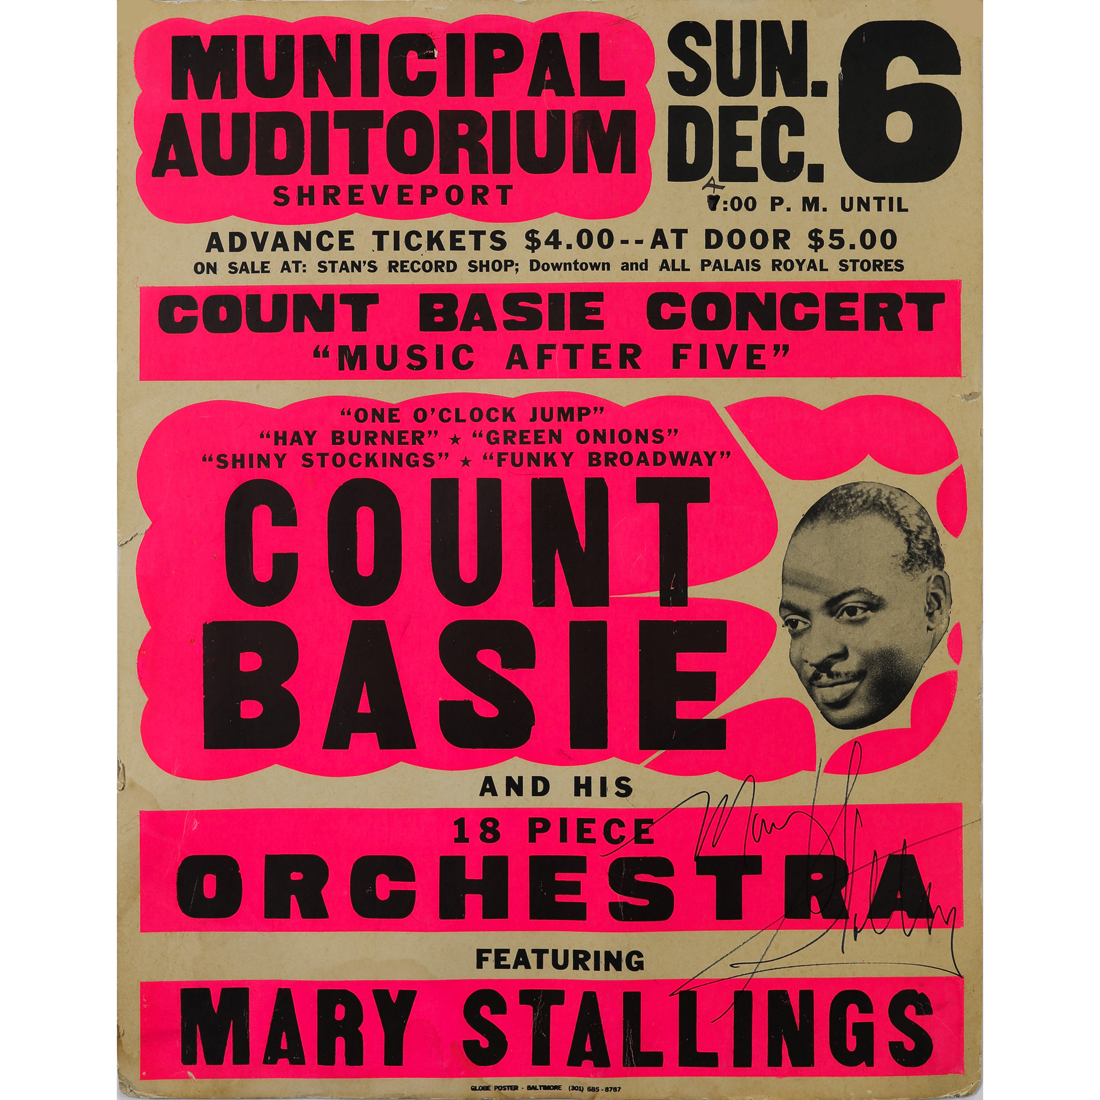 CONCERT POSTER, COUNT BASIE AND